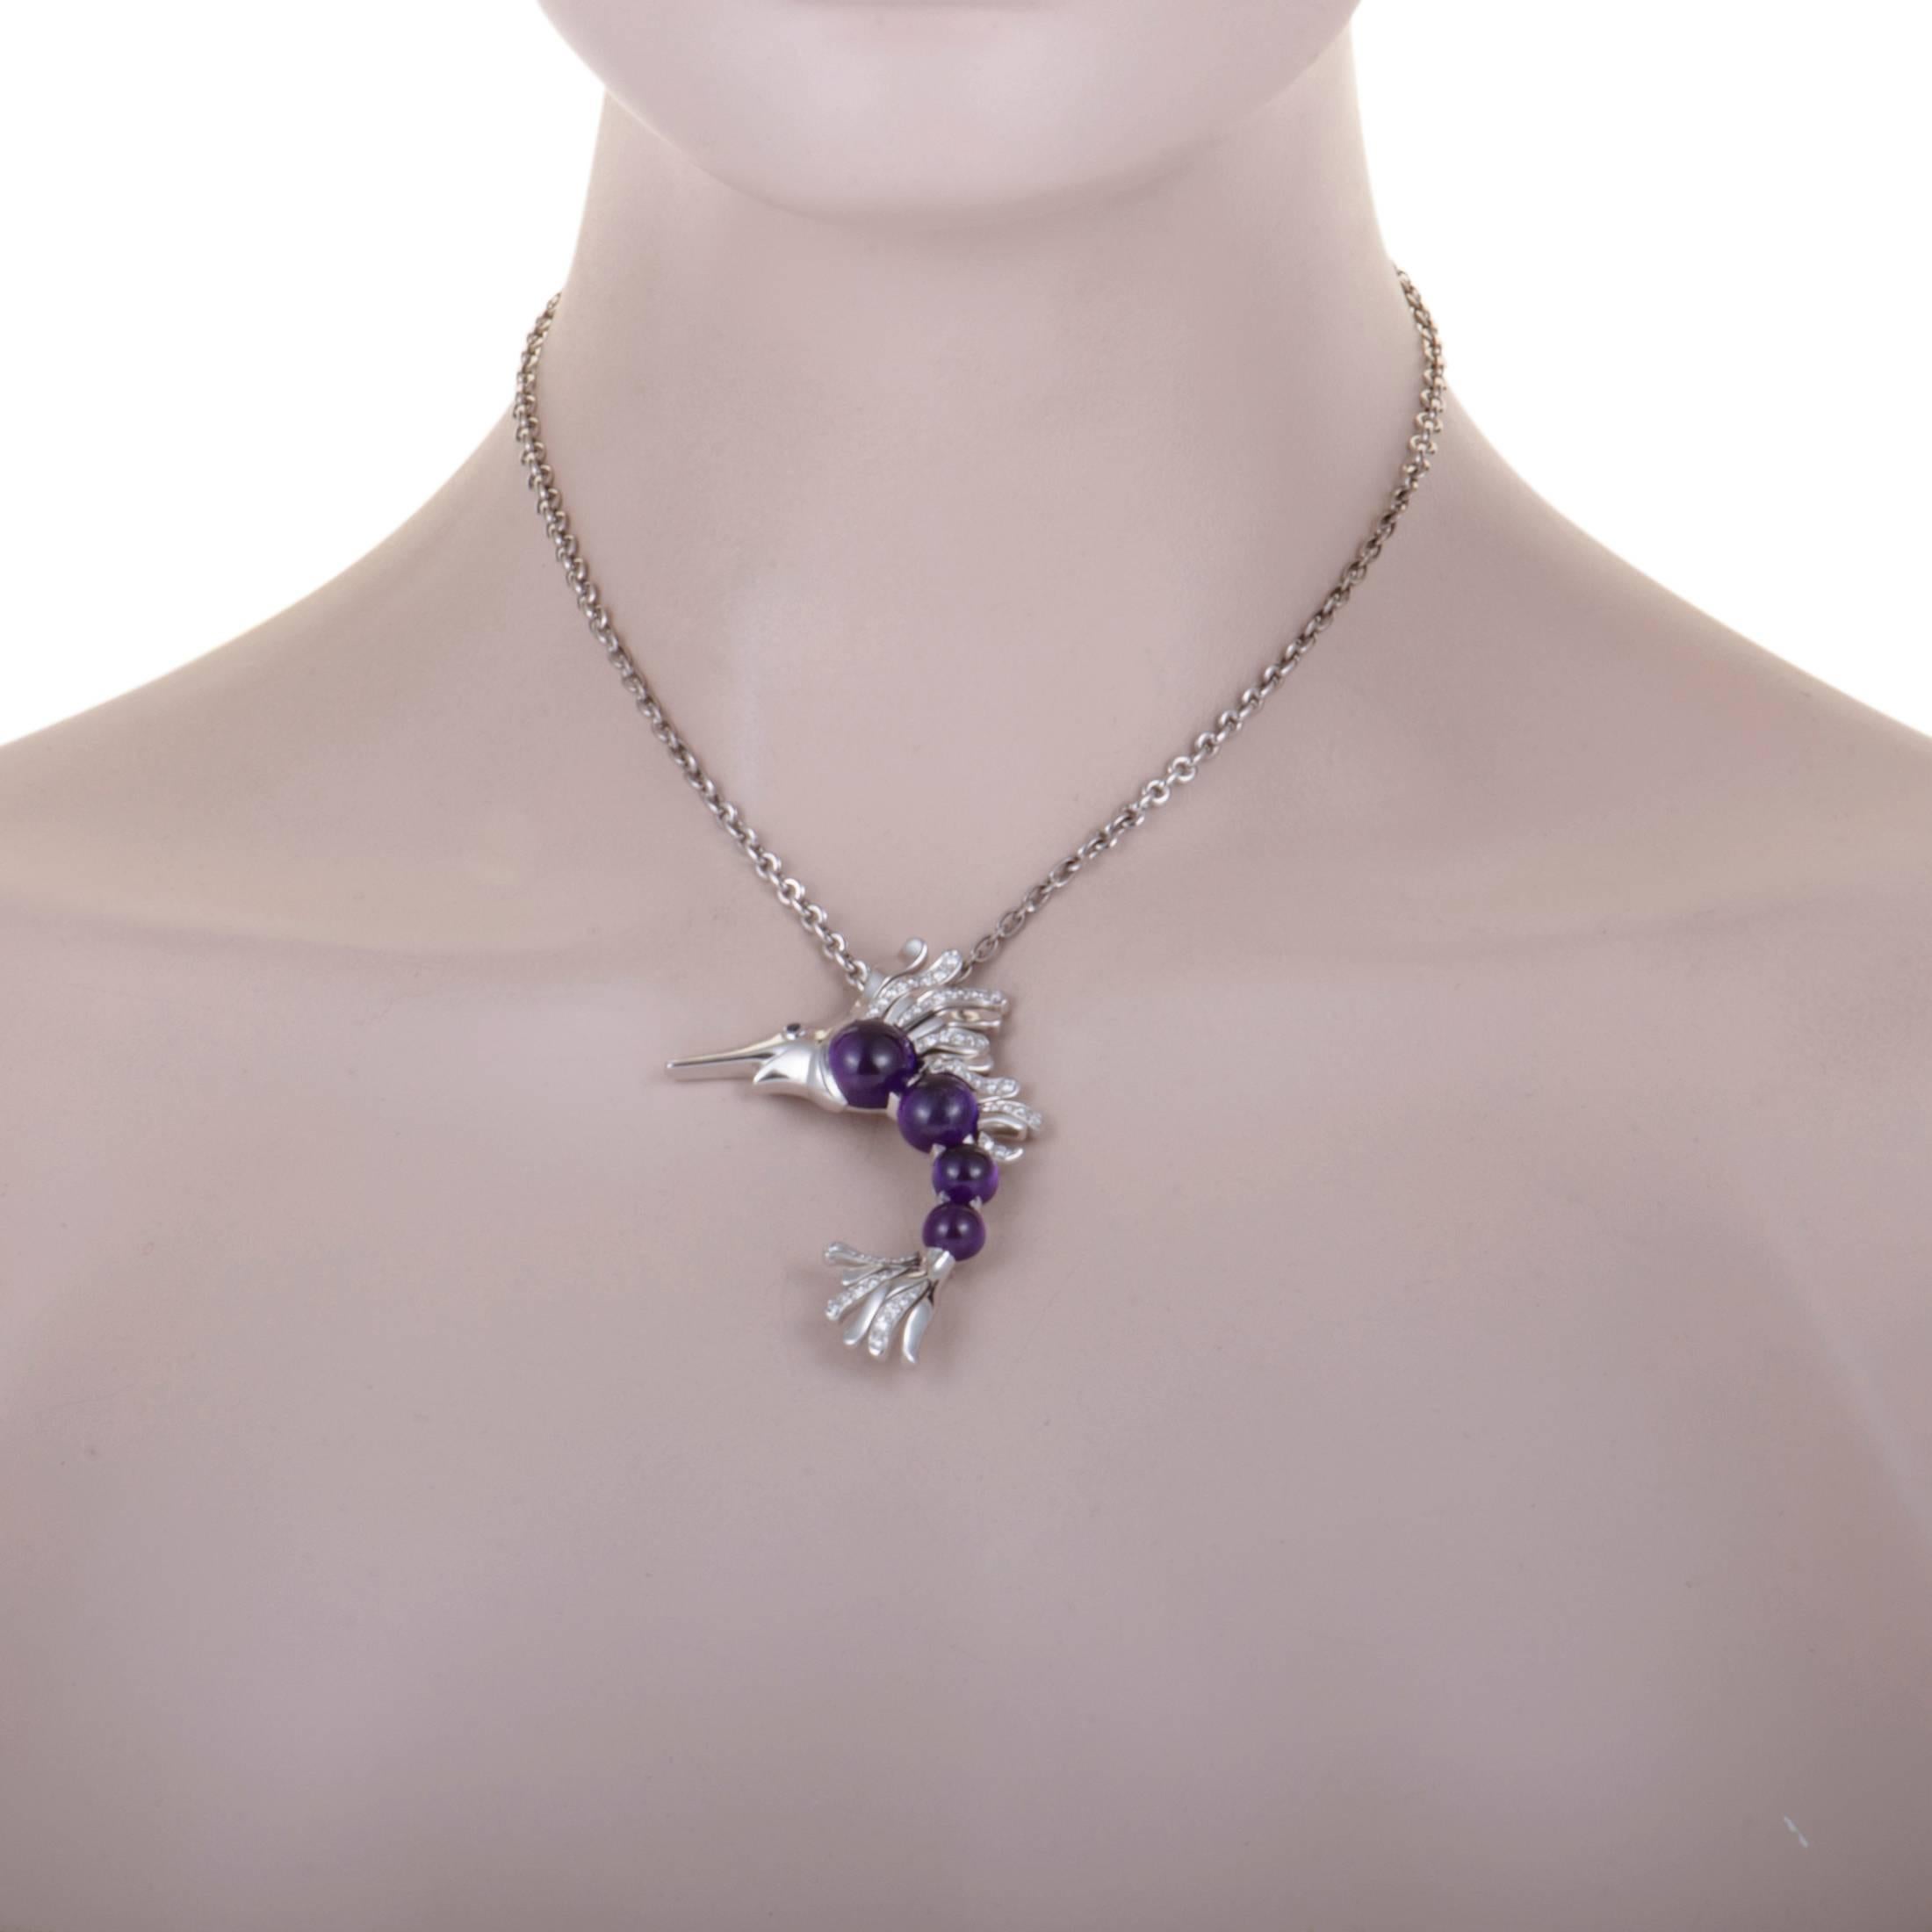 Designed in a compellingly offbeat manner, this spectacular Chanel necklace offers an exceptionally fashionable appearance. The necklace is made of stylish 18K white gold and decorated with eye-catching amethysts and with approximately 1.25 carats